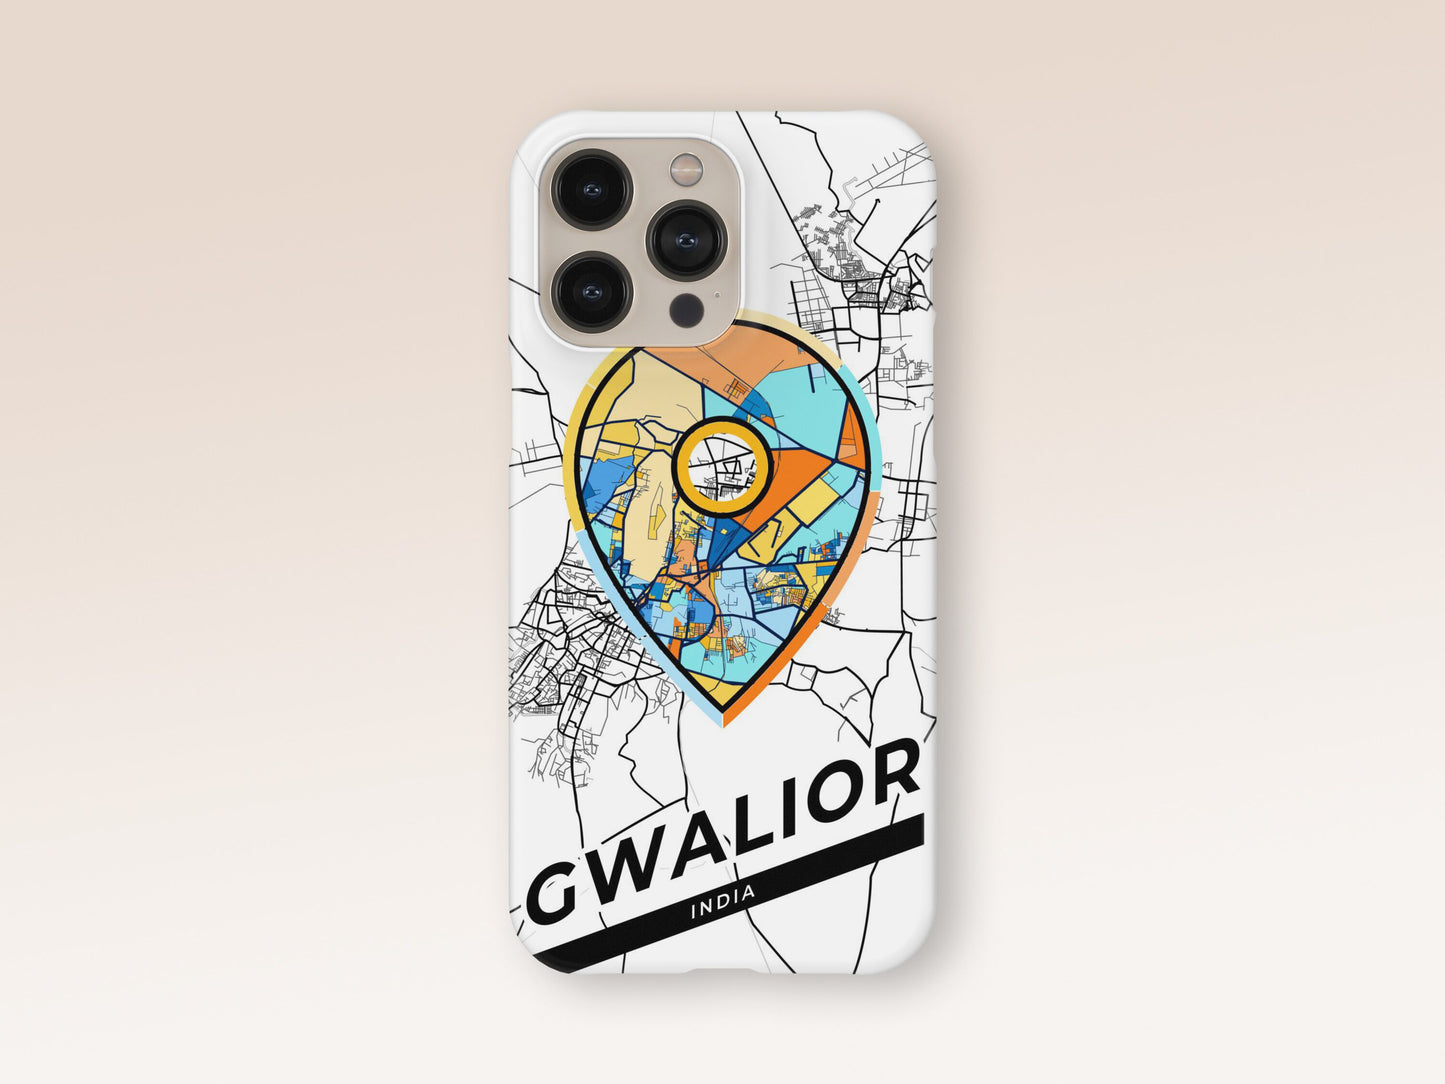 Gwalior India slim phone case with colorful icon. Birthday, wedding or housewarming gift. Couple match cases. 1